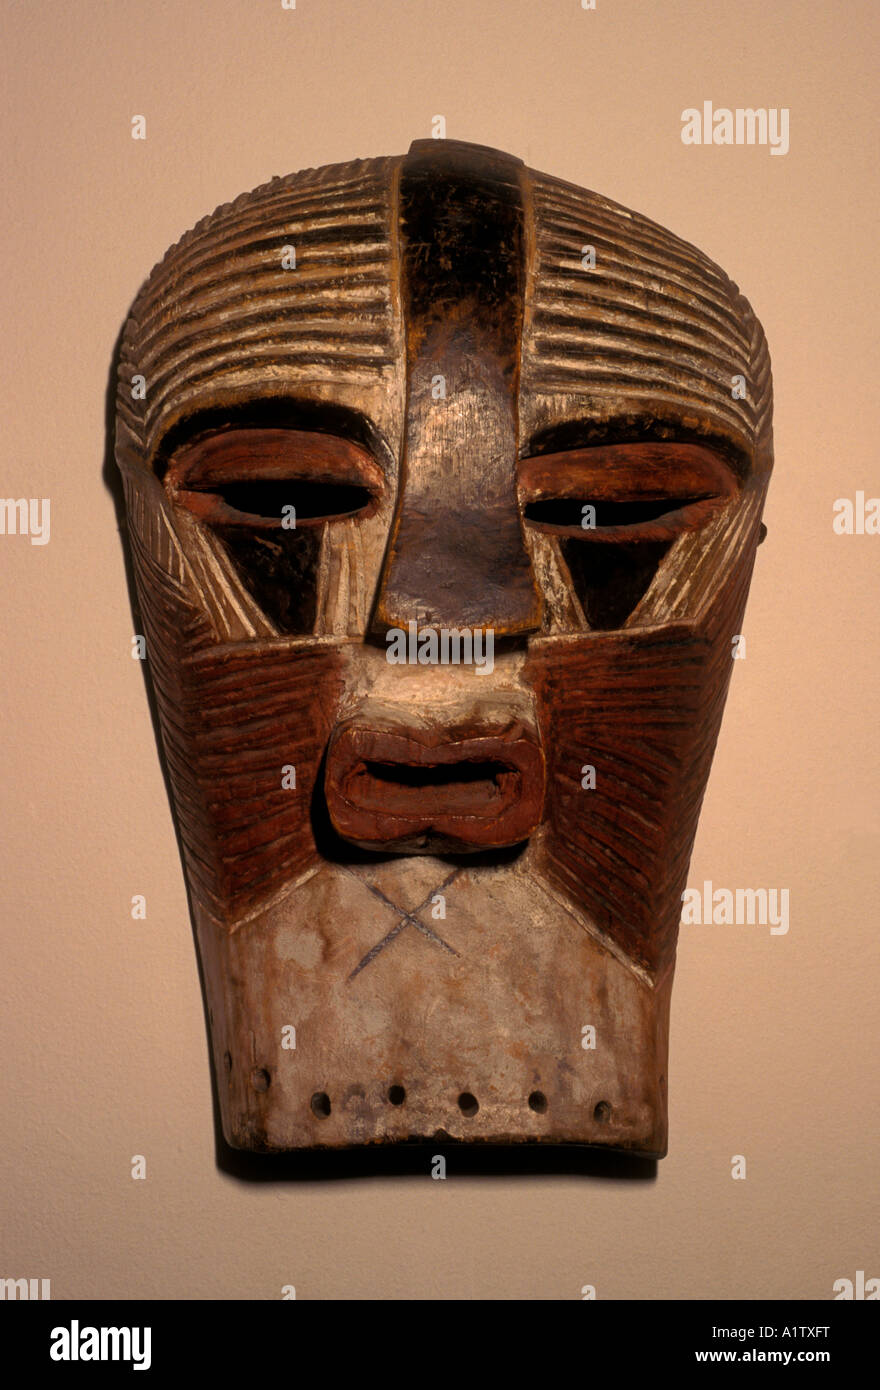 dance mask, mask, made of wood, 41x25x18 cm, National Gallery, city of Harare, Harare, Zimbabwe, Africa Stock Photo